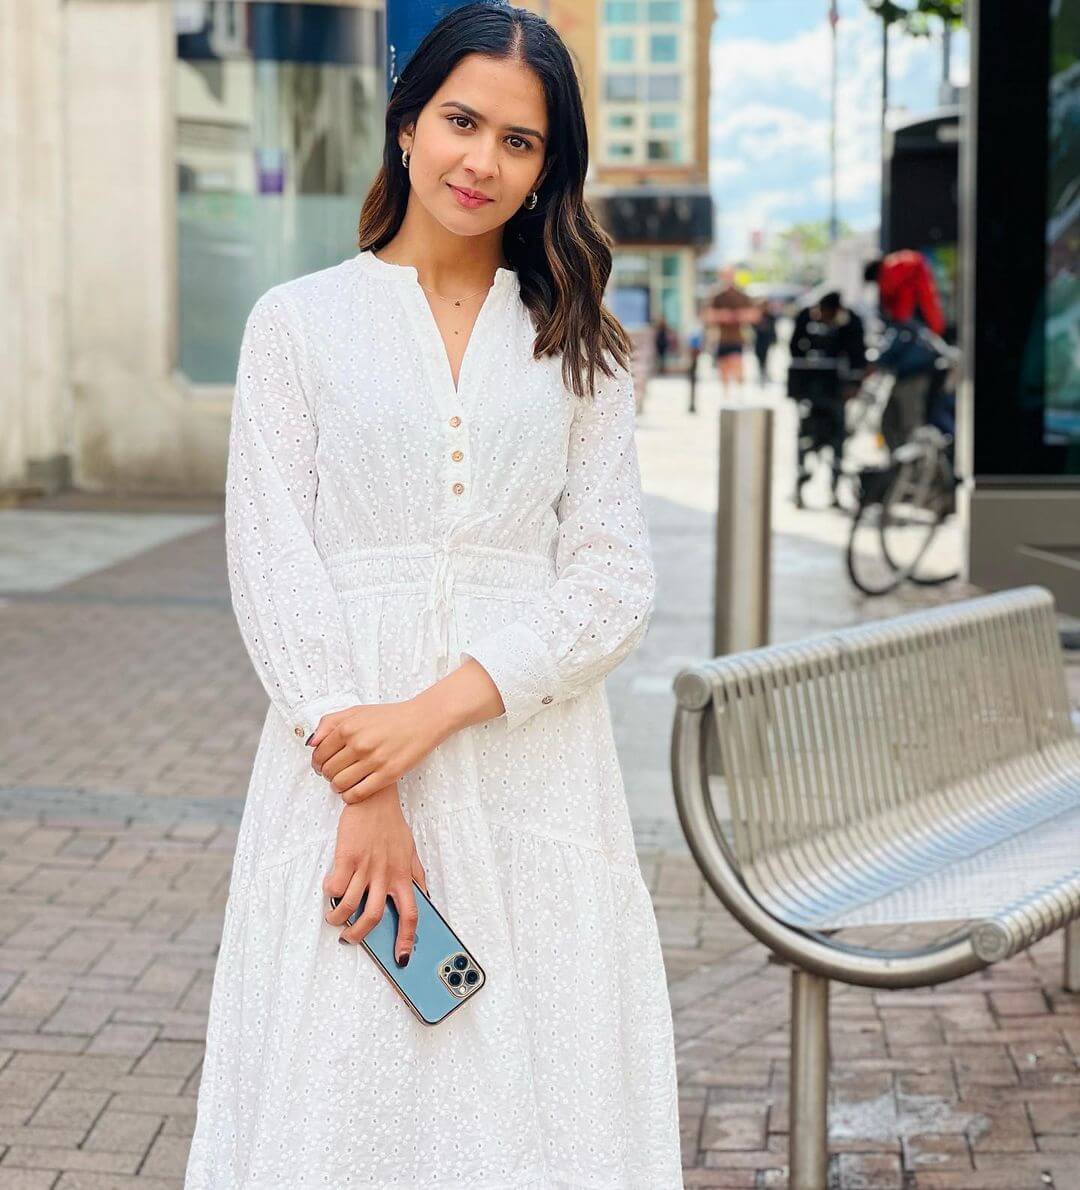 Roopi Gill Wearing Pure White A-Line Dress